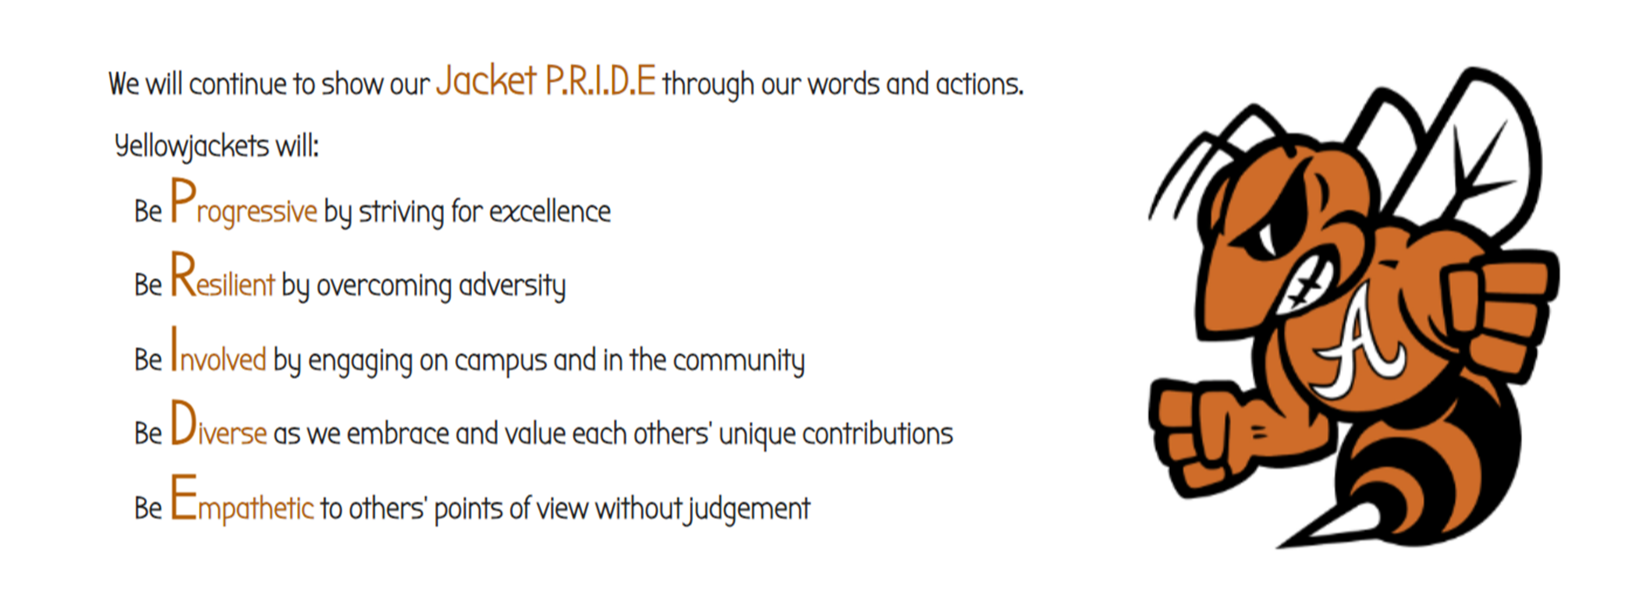 This is an image that shows what our Jacket Pride is all about.